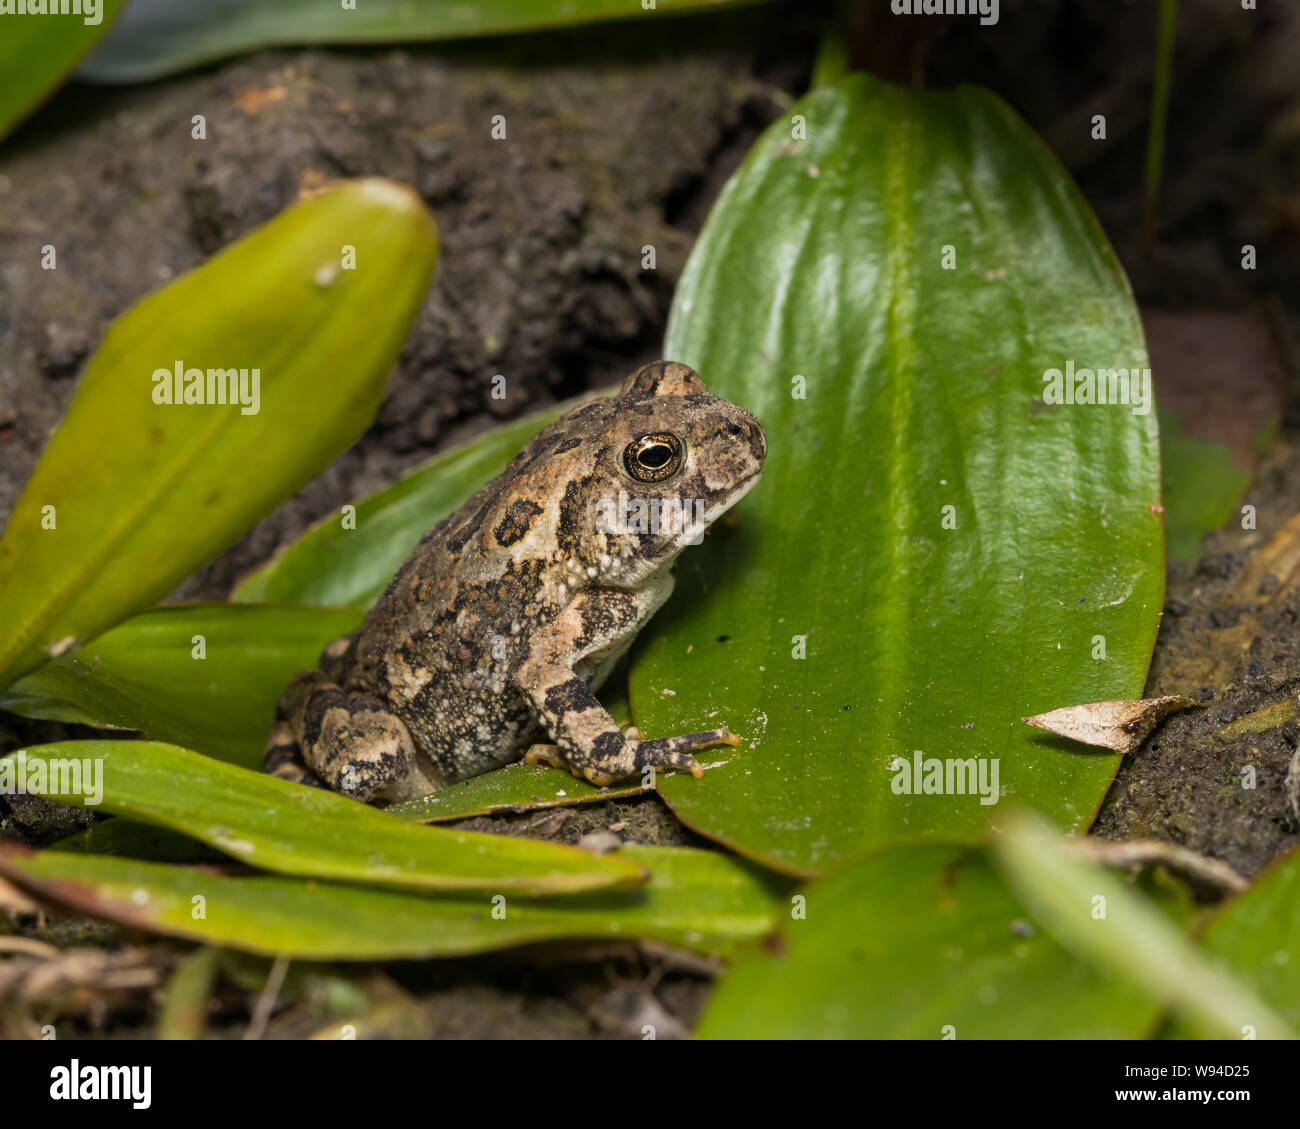 Closeup of Common Eastern American Toad sitting on green aquatic plant leaves at edge of pond Stock Photo